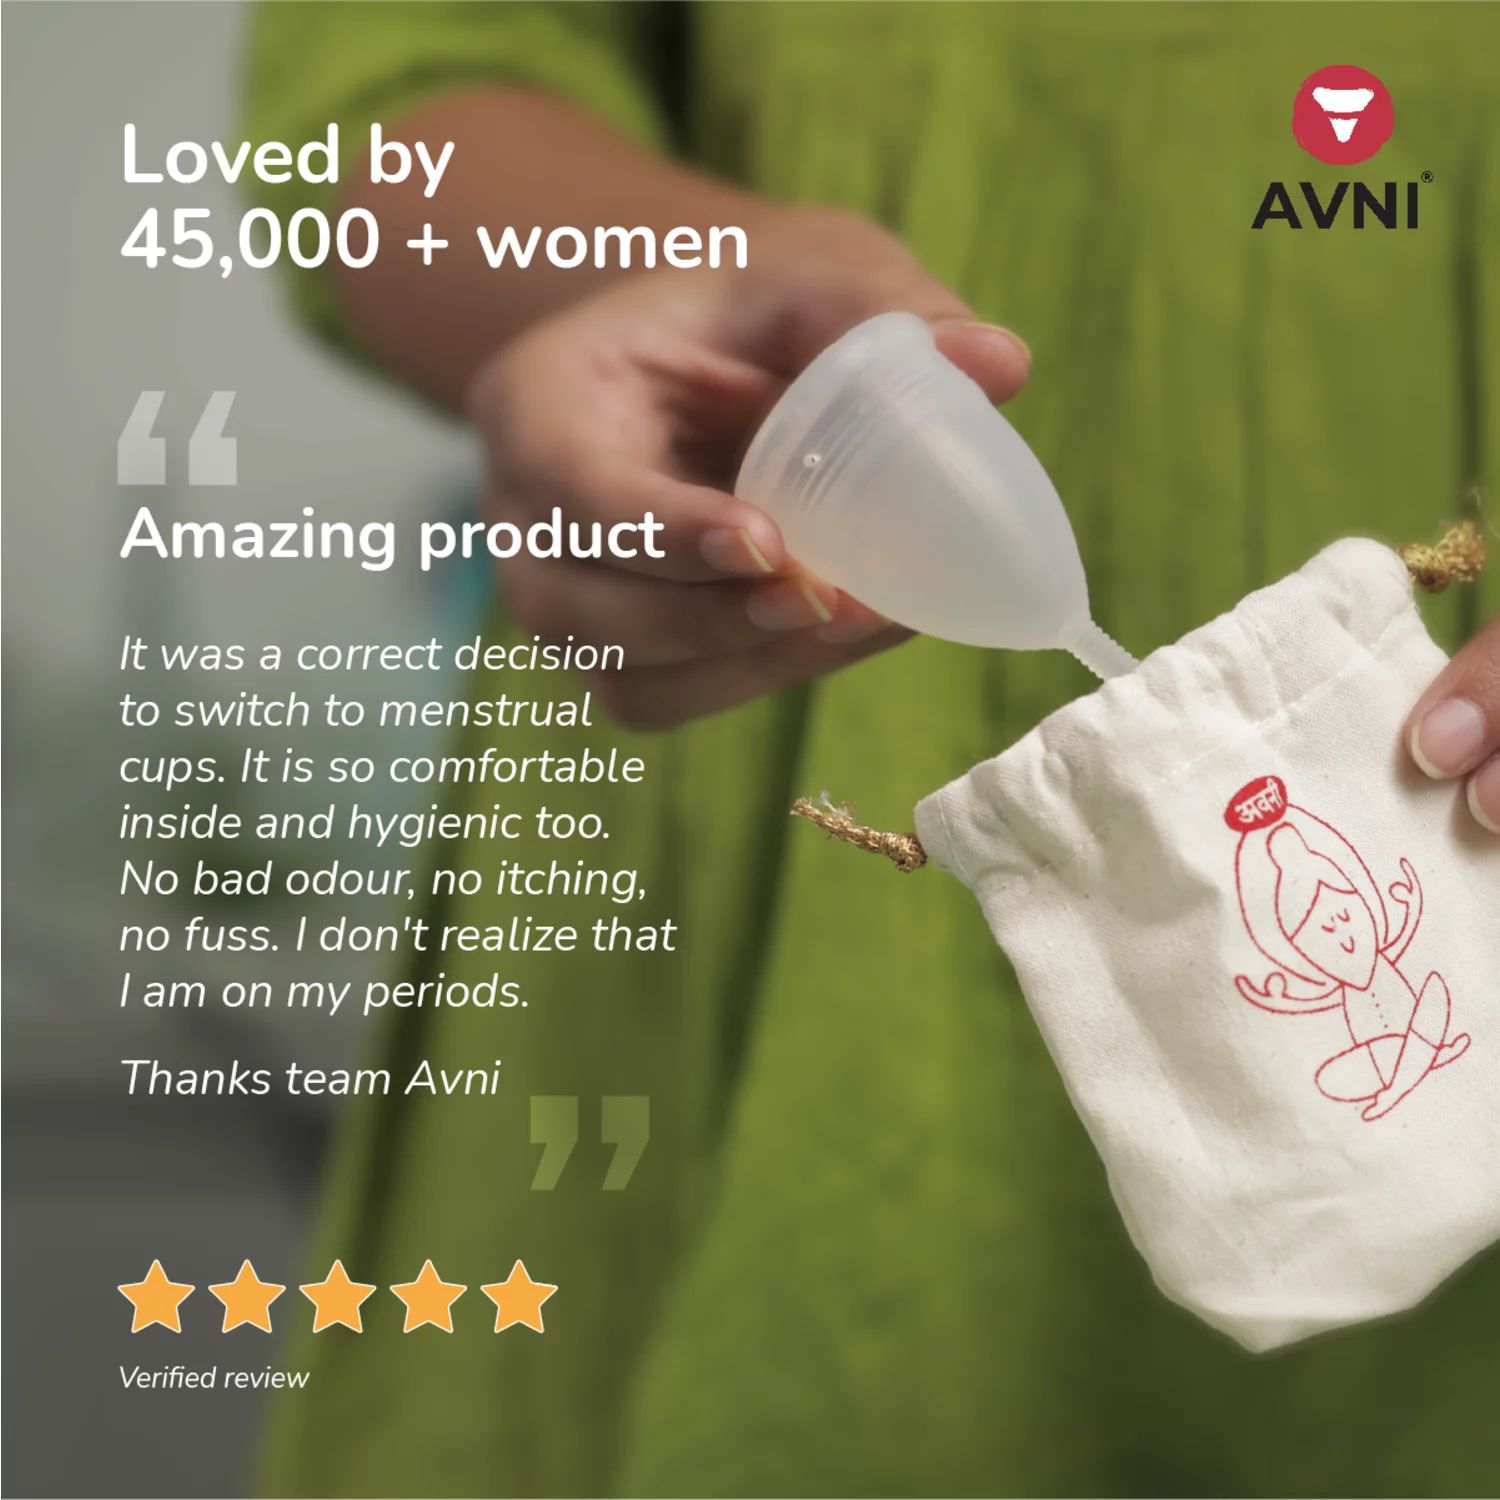 Avni: Empowering women with sustainable menstrual care - India's